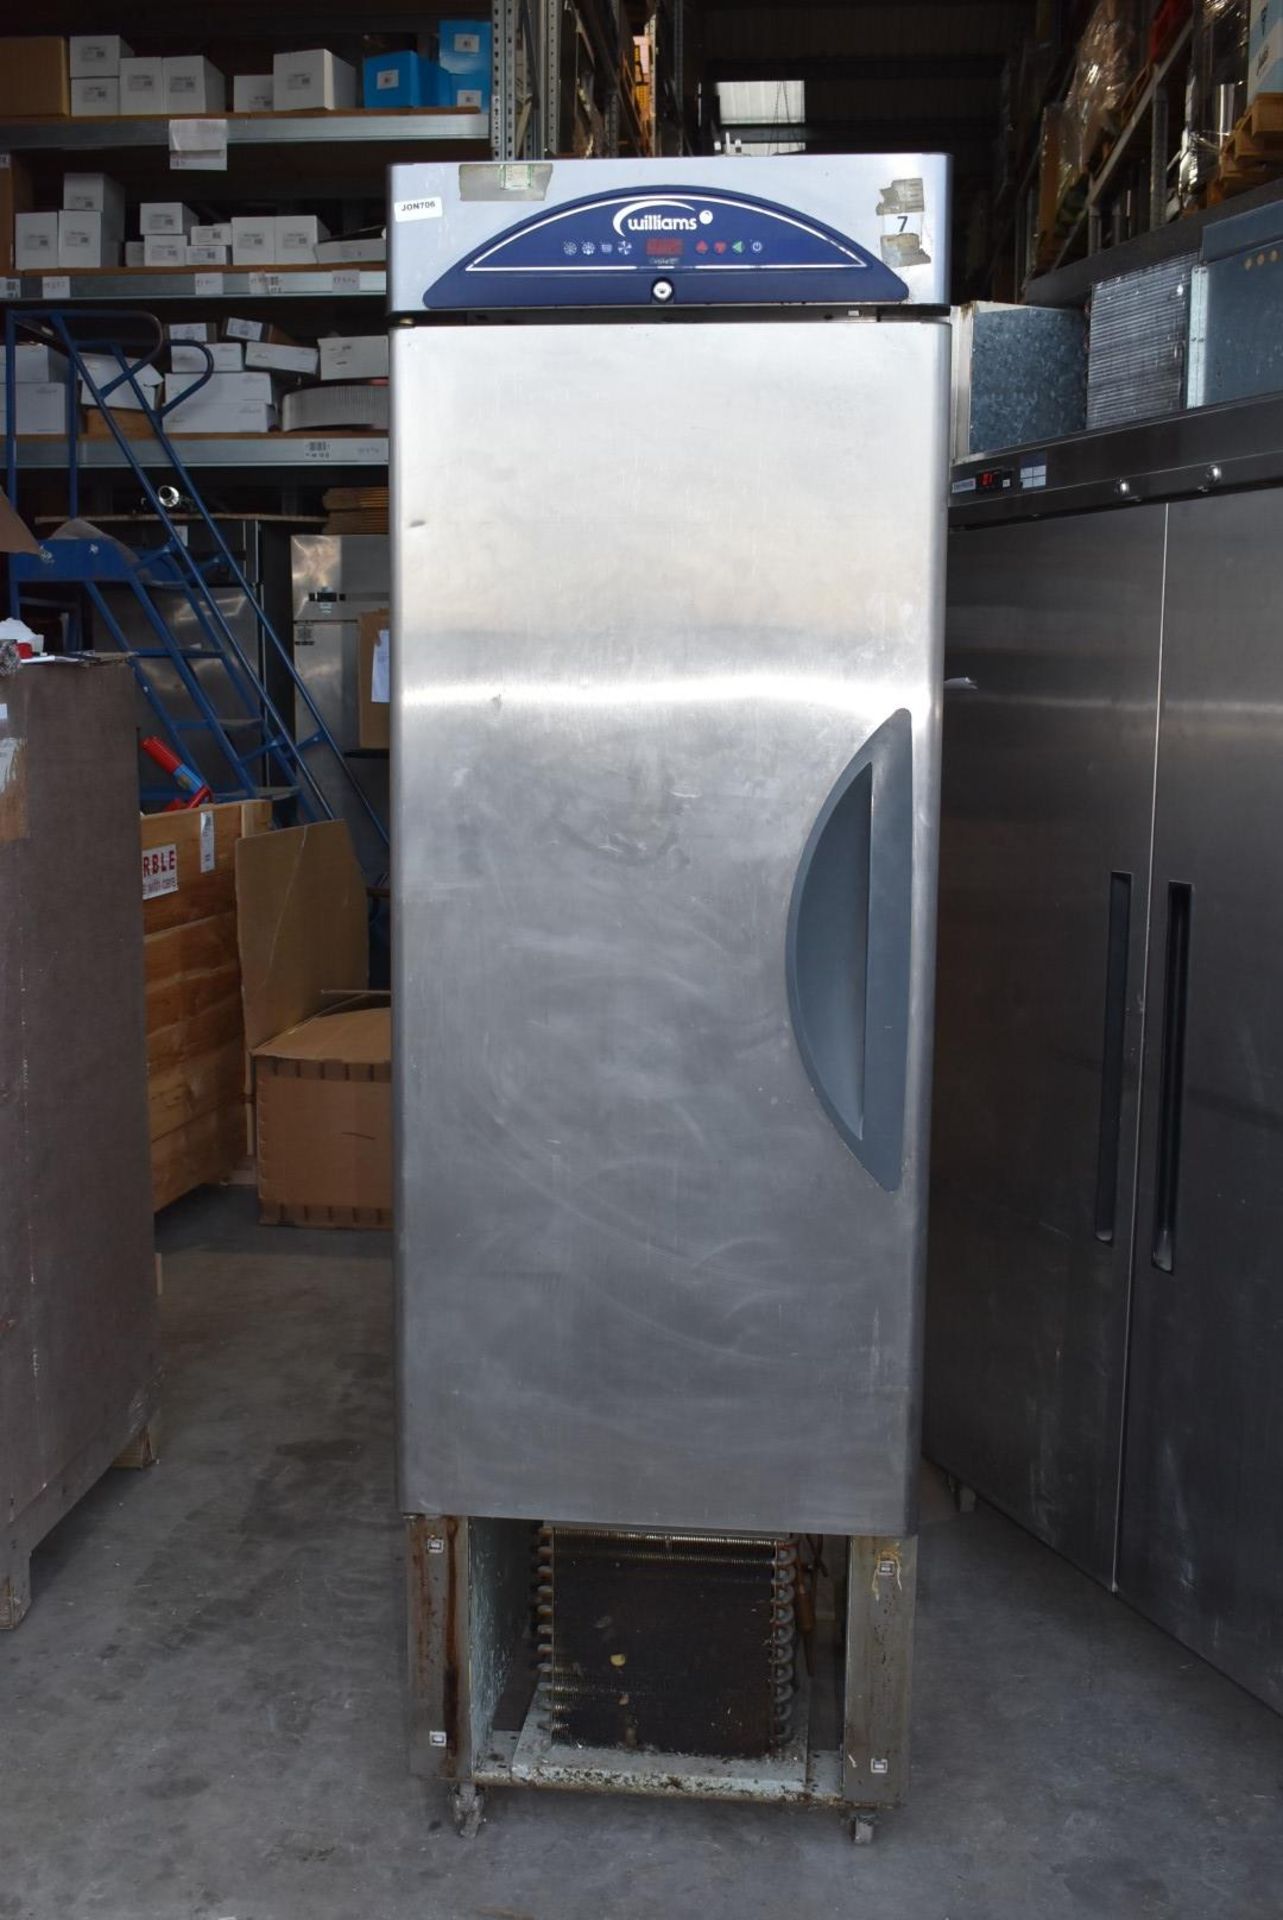 1 x Williams HZ12 Upright Single Door Refrigerator - Recently Removed From a Working Environment - - Image 7 of 8